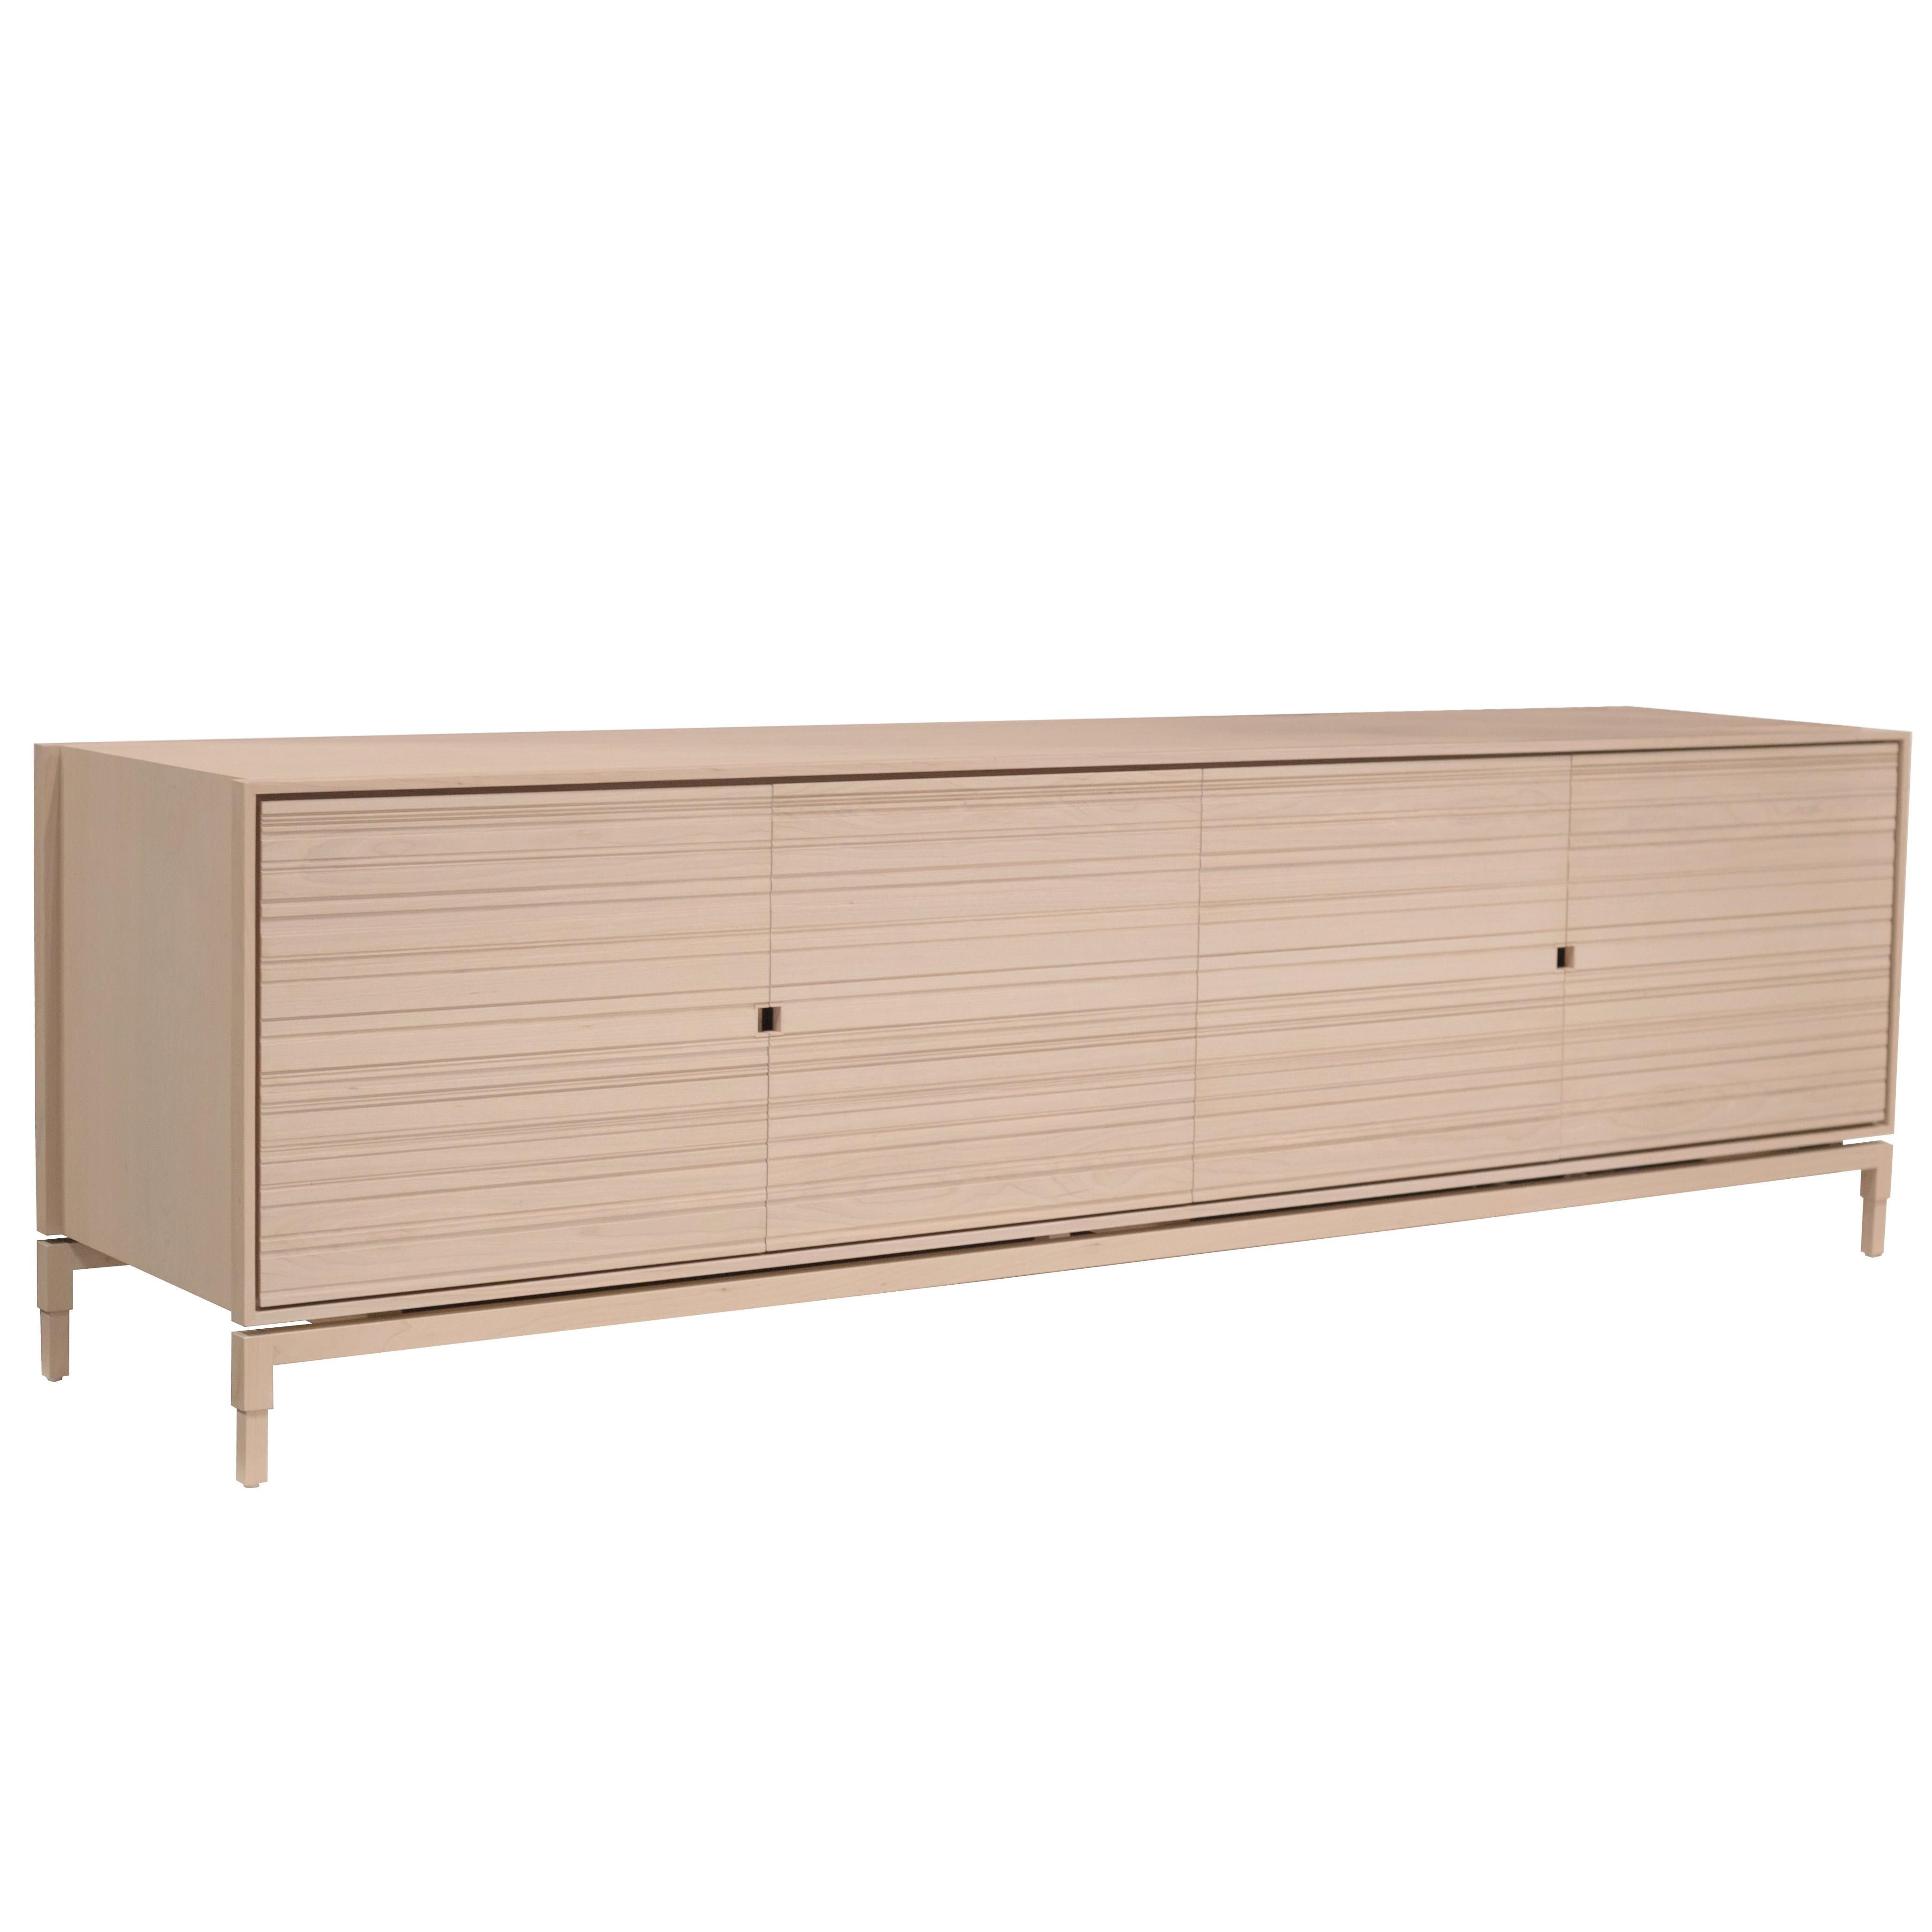 In Stock Chicago Credenza in Blush by May Furniture